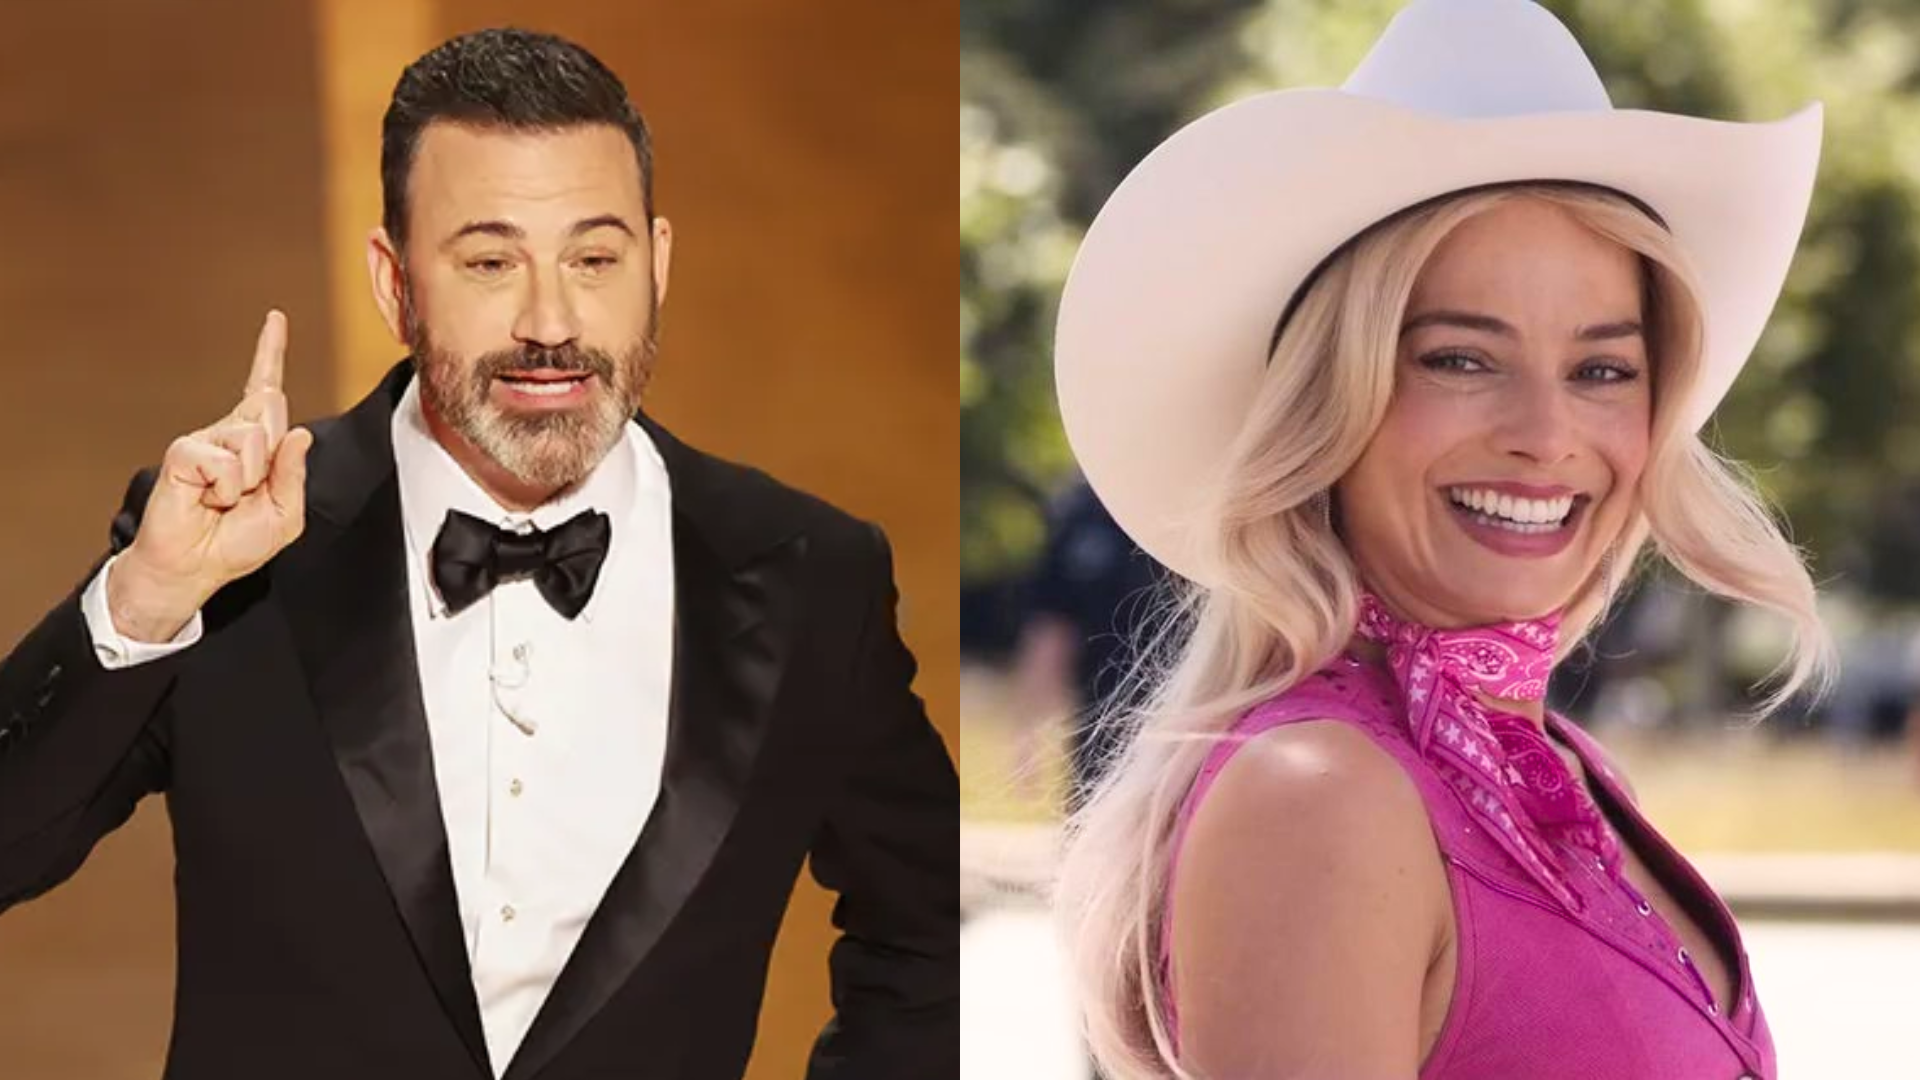 Jimmy Kimmel Addresses Barbie Snub While Taking A Dig At Oscar Voters: “You’re The Ones Who Didn’t Vote For…”